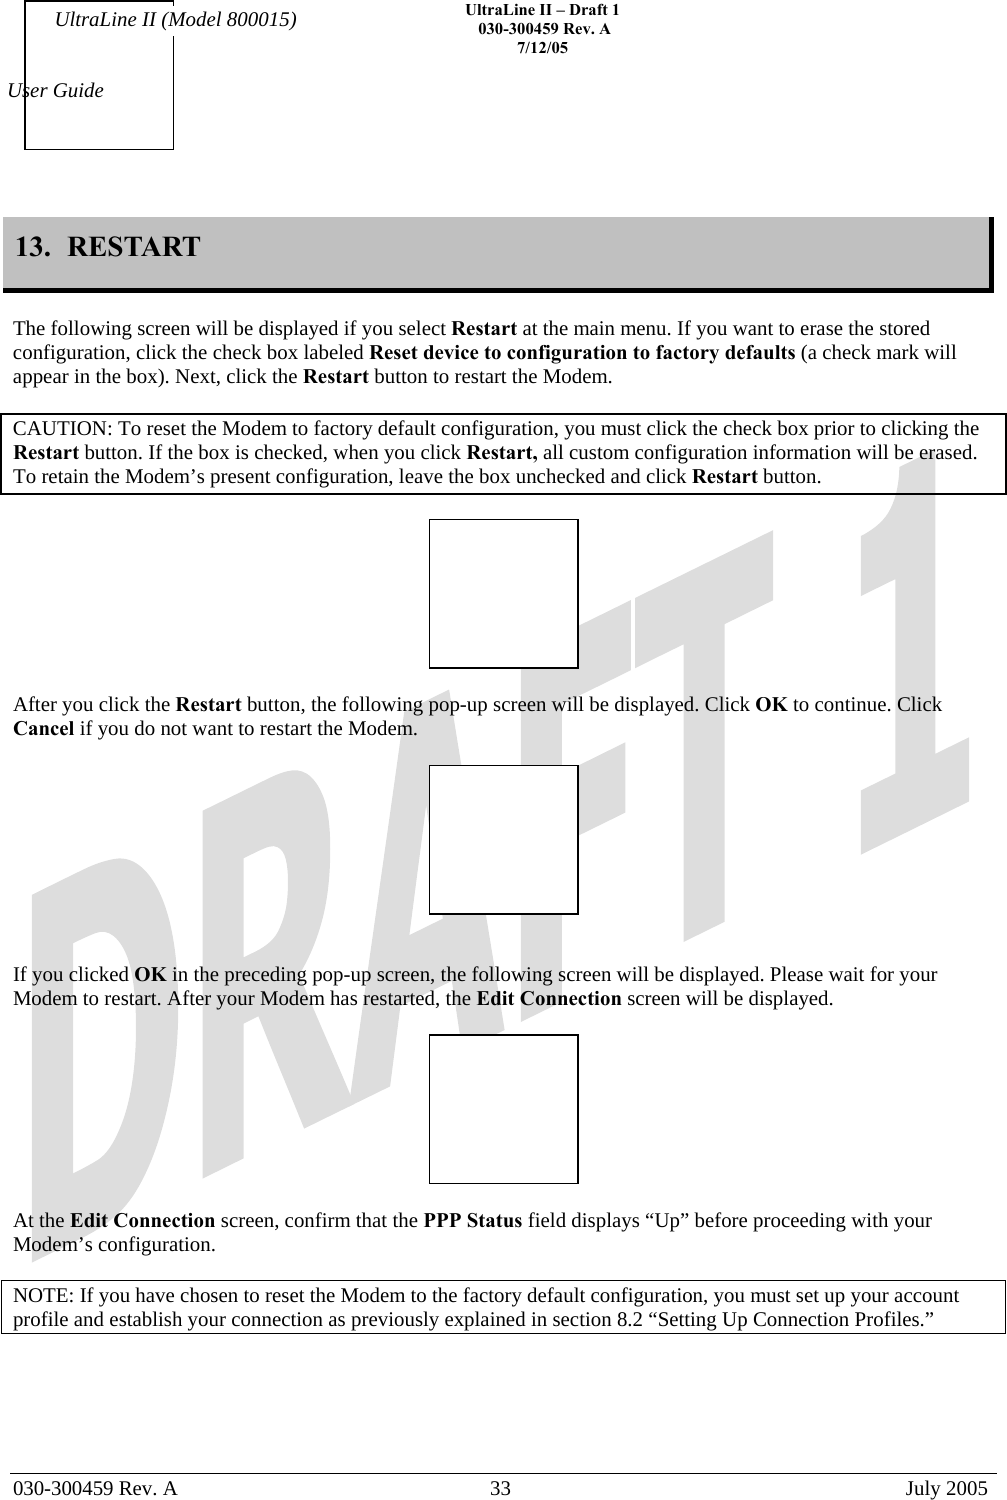    UltraLine II – Draft 1   030-300459 Rev. A 7/12/05   030-300459 Rev. A  33  July 2005  User Guide UltraLine II (Model 800015) 13.  RESTART  The following screen will be displayed if you select Restart at the main menu. If you want to erase the stored configuration, click the check box labeled Reset device to configuration to factory defaults (a check mark will appear in the box). Next, click the Restart button to restart the Modem.  CAUTION: To reset the Modem to factory default configuration, you must click the check box prior to clicking the Restart button. If the box is checked, when you click Restart, all custom configuration information will be erased. To retain the Modem’s present configuration, leave the box unchecked and click Restart button.    After you click the Restart button, the following pop-up screen will be displayed. Click OK to continue. Click Cancel if you do not want to restart the Modem.     If you clicked OK in the preceding pop-up screen, the following screen will be displayed. Please wait for your Modem to restart. After your Modem has restarted, the Edit Connection screen will be displayed.    At the Edit Connection screen, confirm that the PPP Status field displays “Up” before proceeding with your Modem’s configuration.  NOTE: If you have chosen to reset the Modem to the factory default configuration, you must set up your account profile and establish your connection as previously explained in section 8.2 “Setting Up Connection Profiles.”  